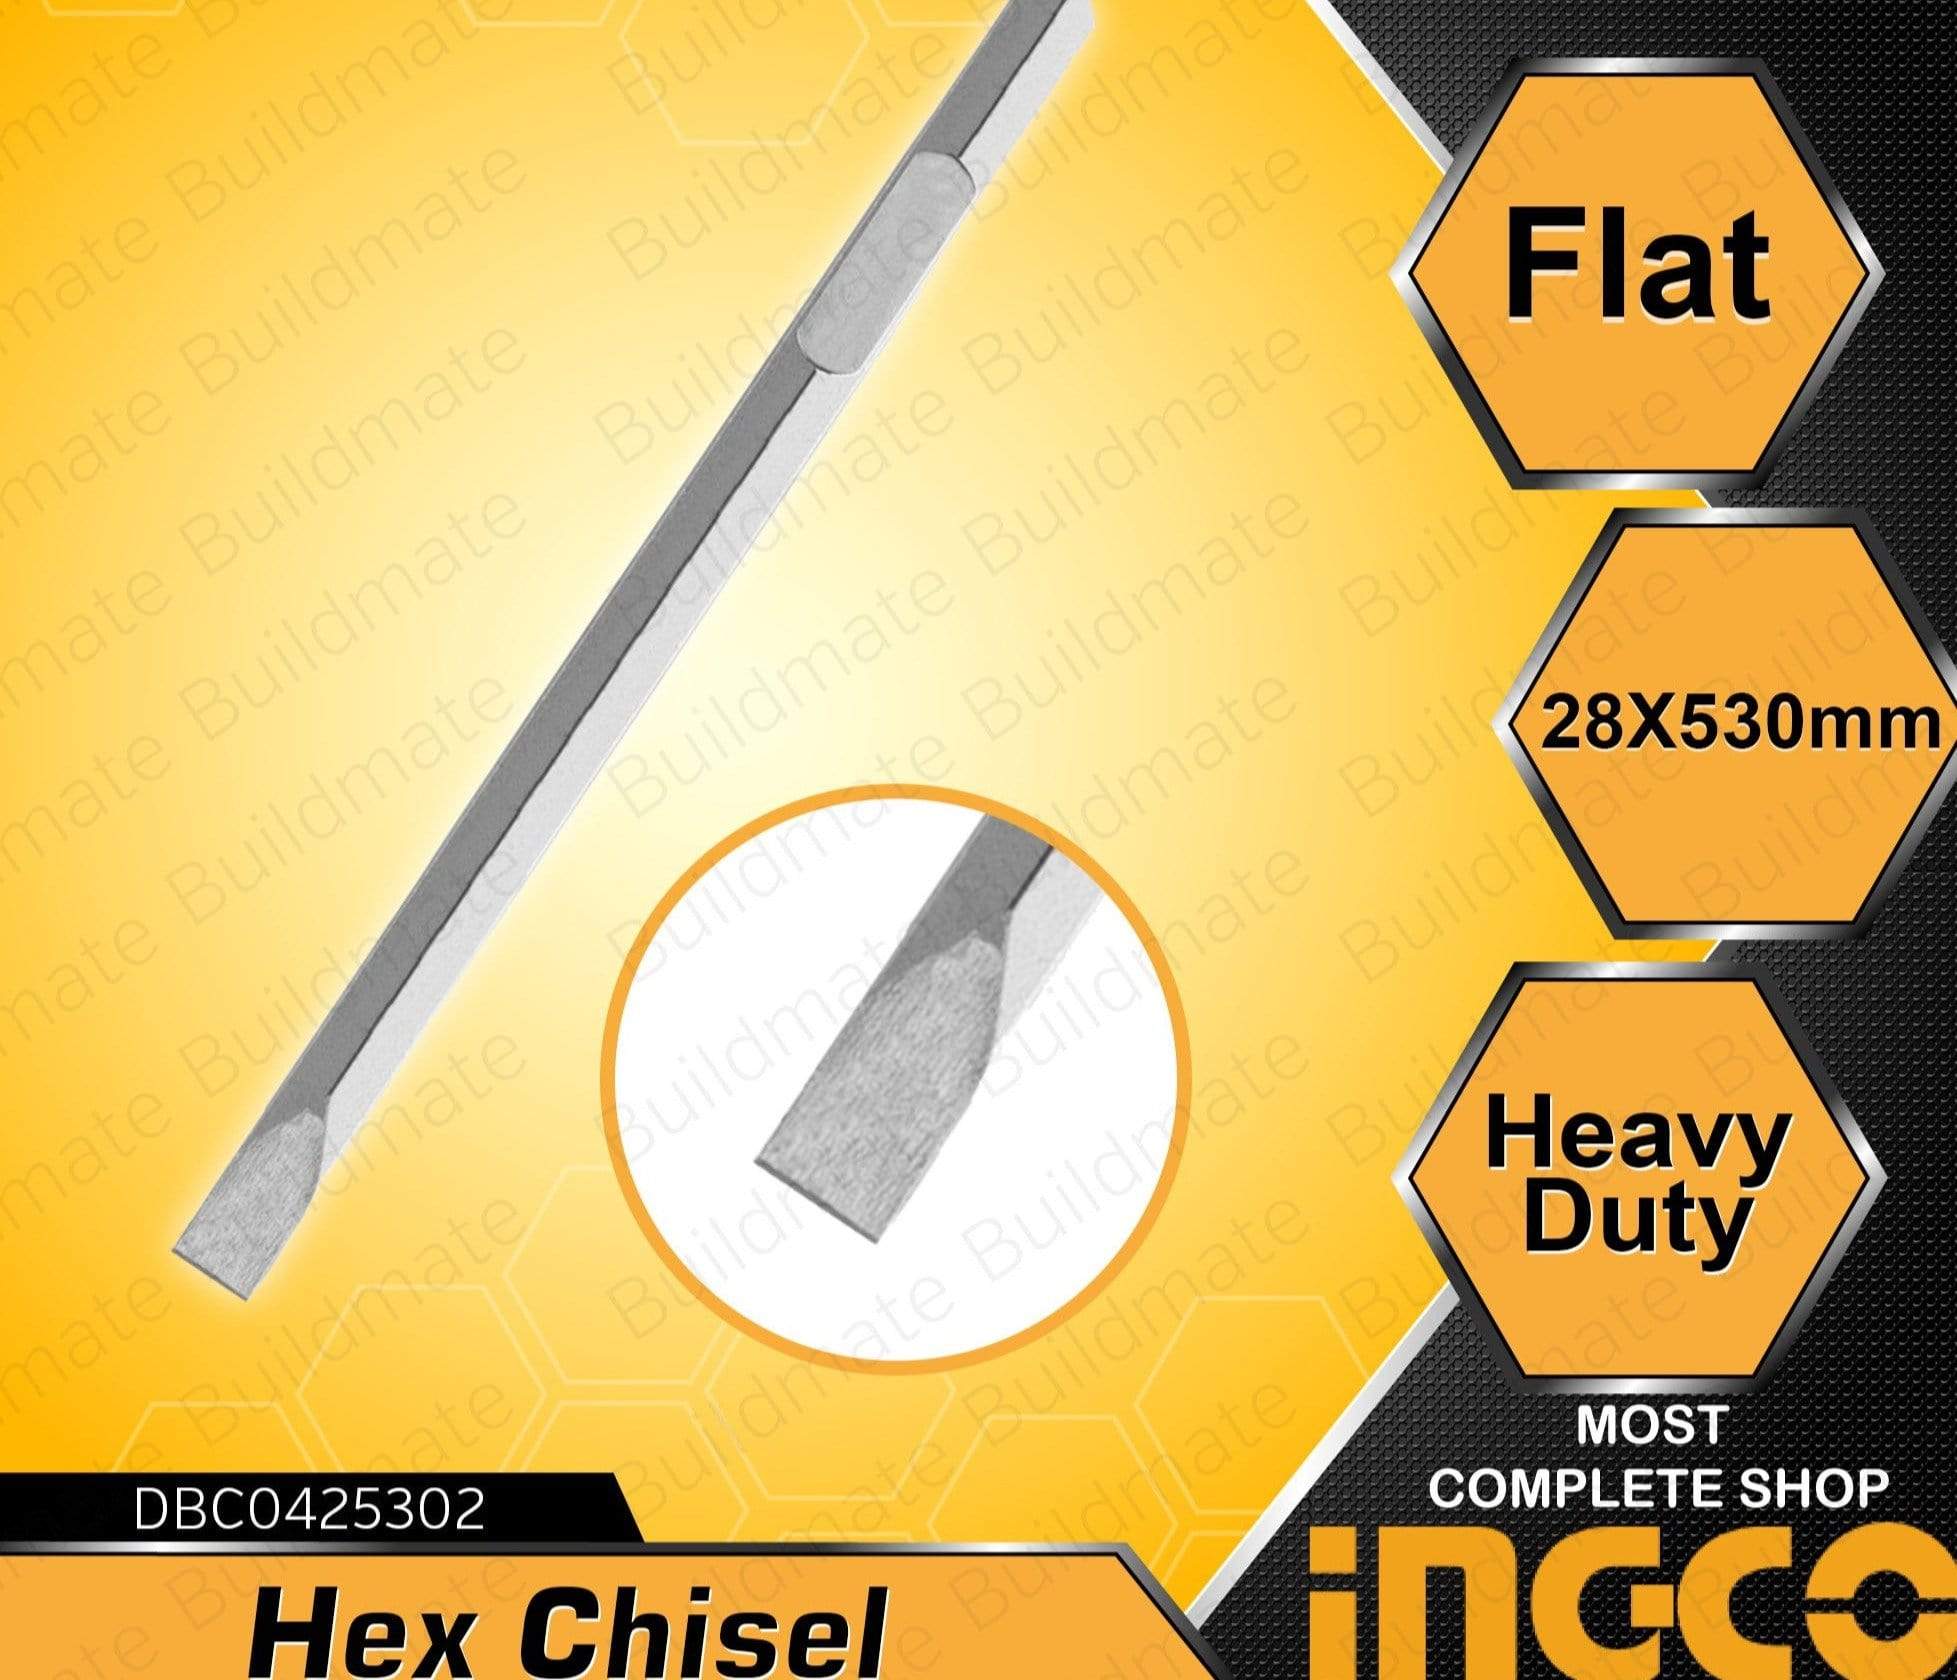 Ingco Hex Chisel | Supply Master | Accra, Ghana Tools 28x530mm Building Steel Engineering Hardware tool